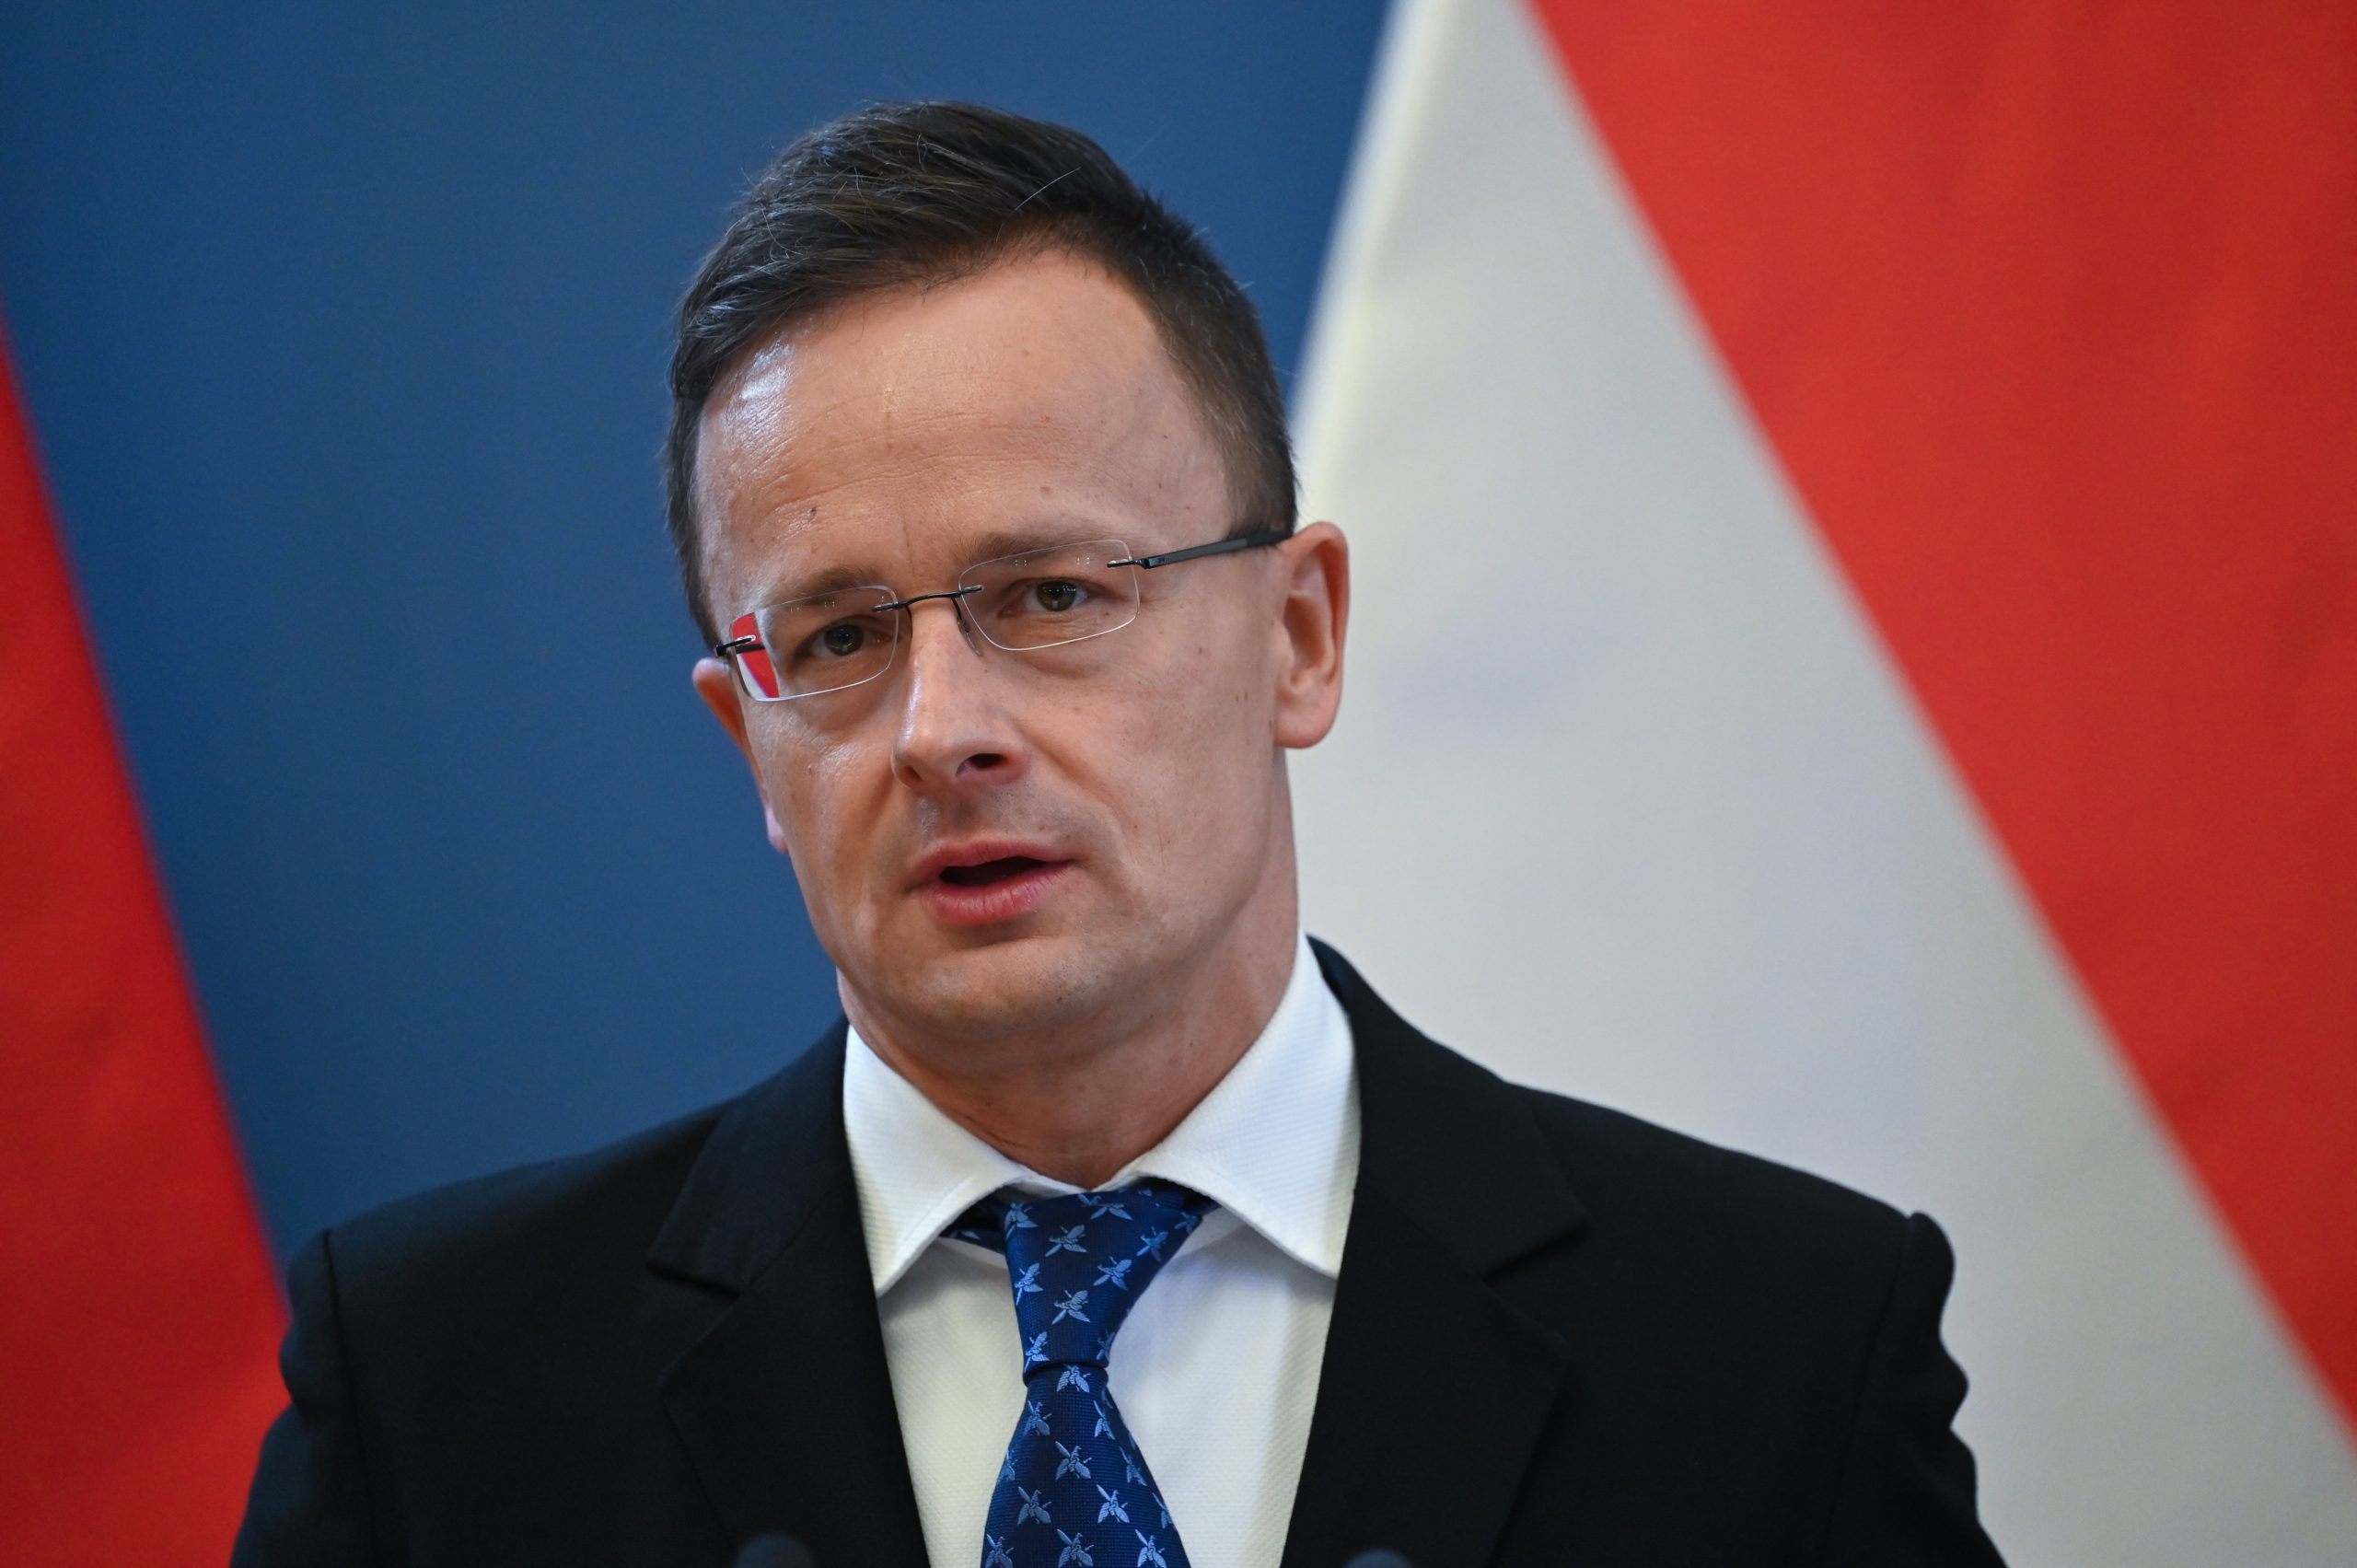 FM Szijjártó Suspects USA of Planning to Interfere in Hungarian Election